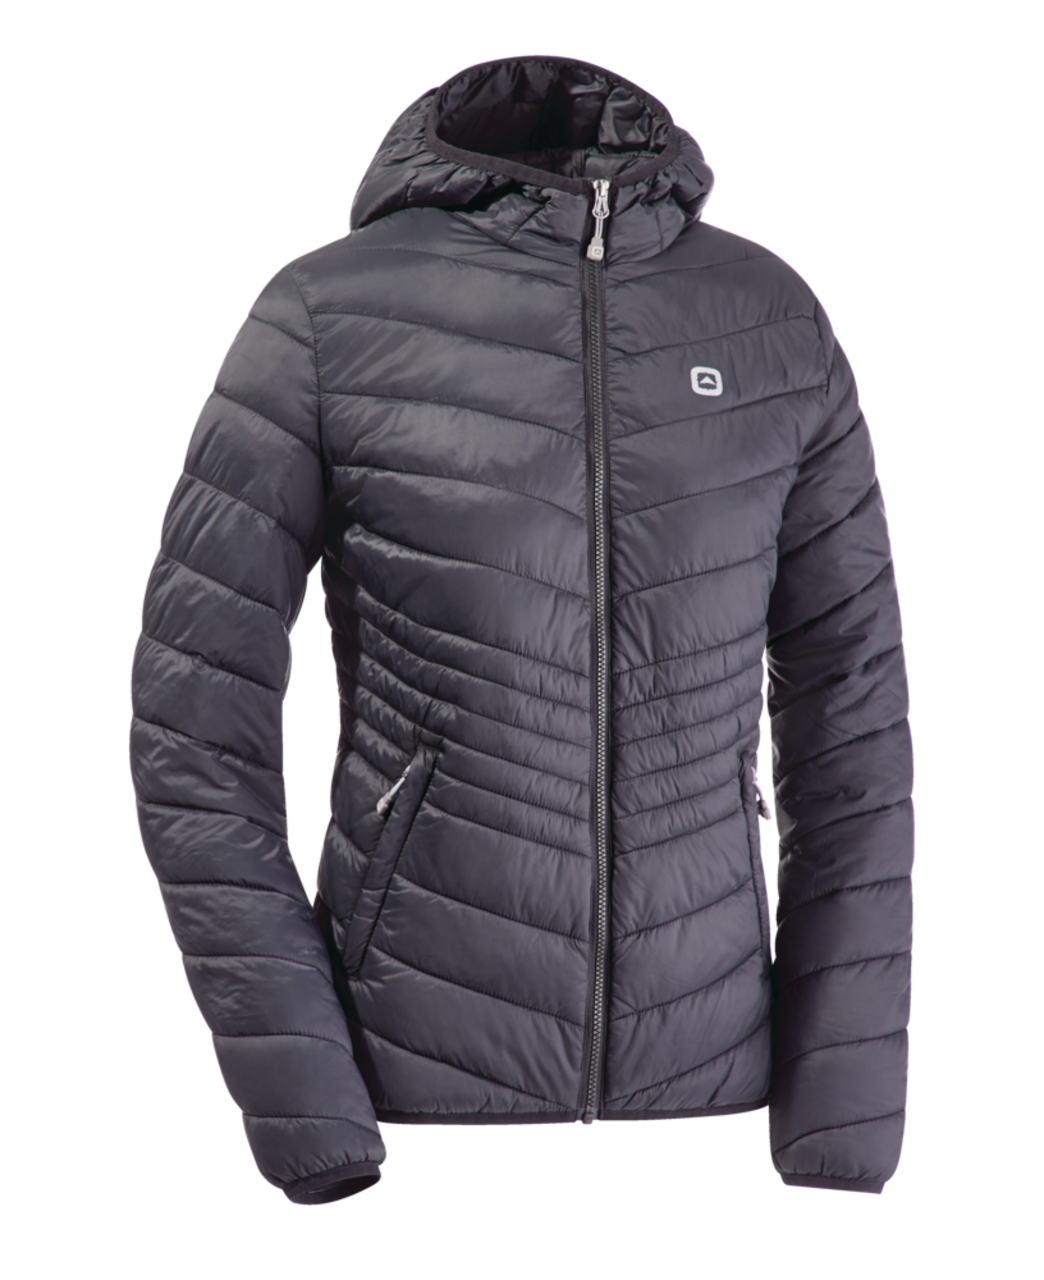 https://media-www.canadiantire.ca/product/playing/footwear-apparel/winter-footwear-apparel/1872316/outbound-women-s-charlotte-puffy-jacket-black-xs-fcdce279-ad5f-4f95-9715-9ad9440223d2.png?imdensity=1&imwidth=1244&impolicy=mZoom